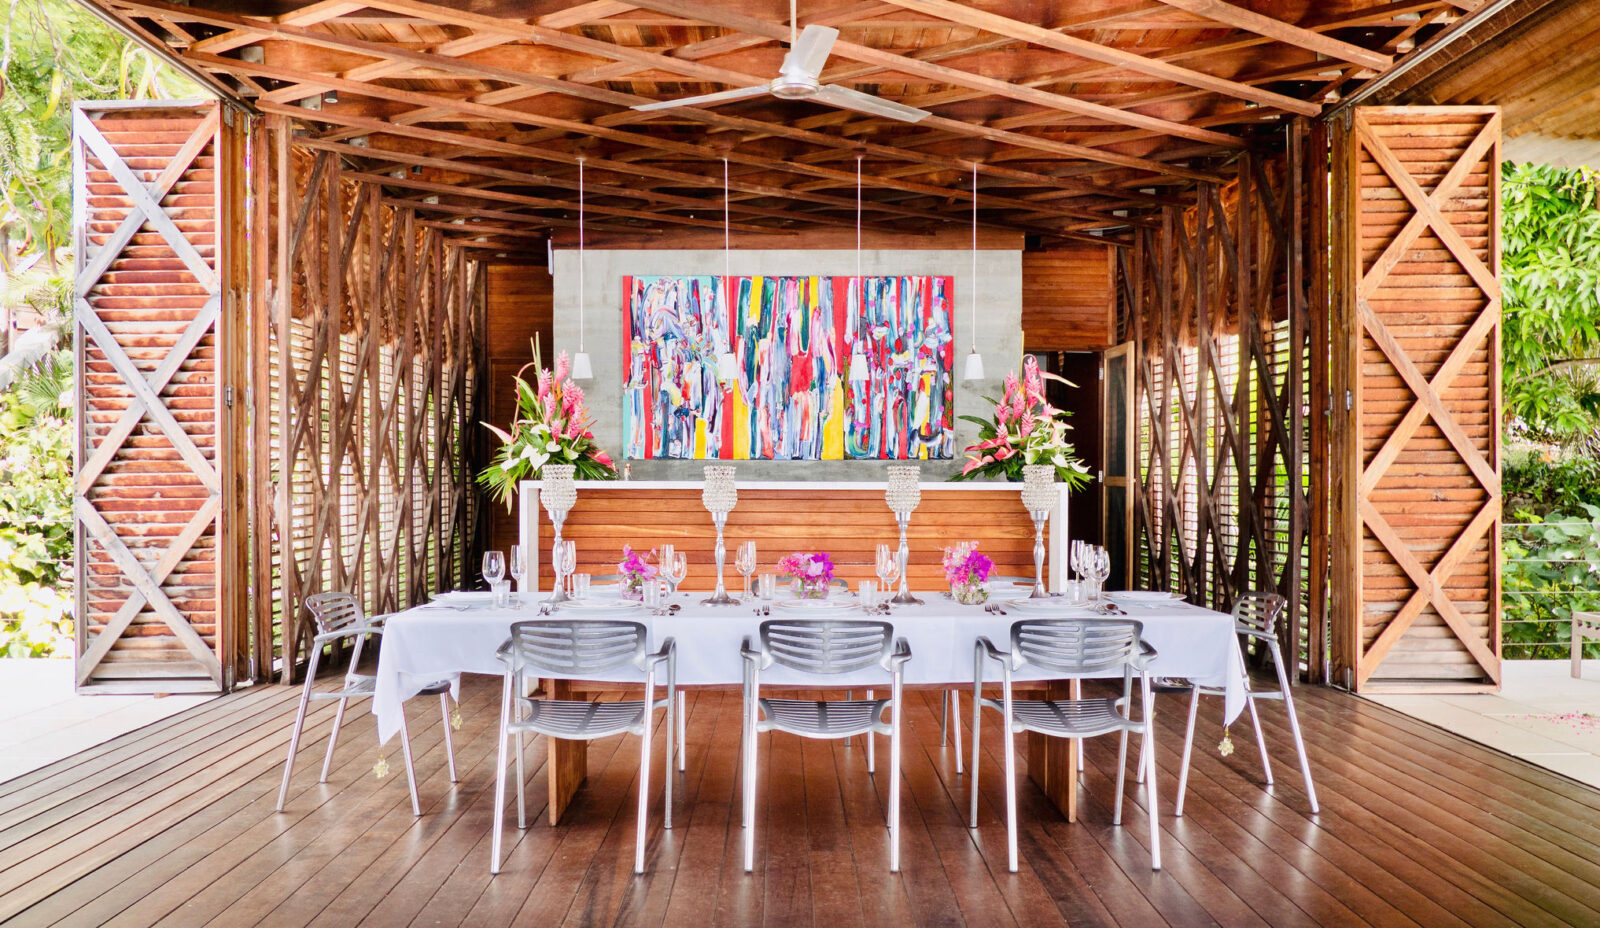 A celebratory table setting for 8 people featuring white and silver tableware, large floral arrangements and a brightly coloured painting in an entirely wooden Cantilever at Cosmos St Lucia